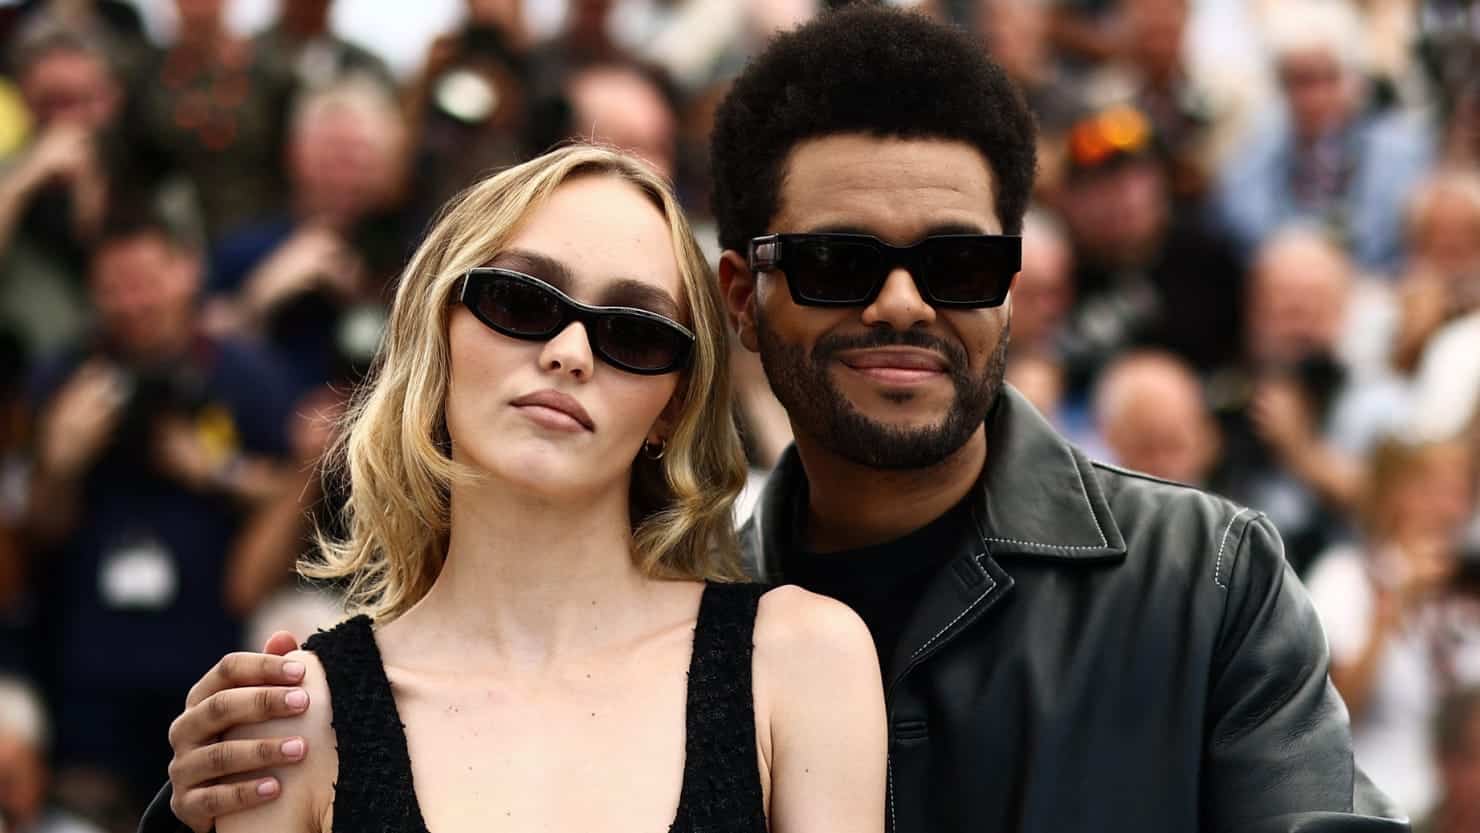 Lily-Rose Depp and The Weeknd Dating